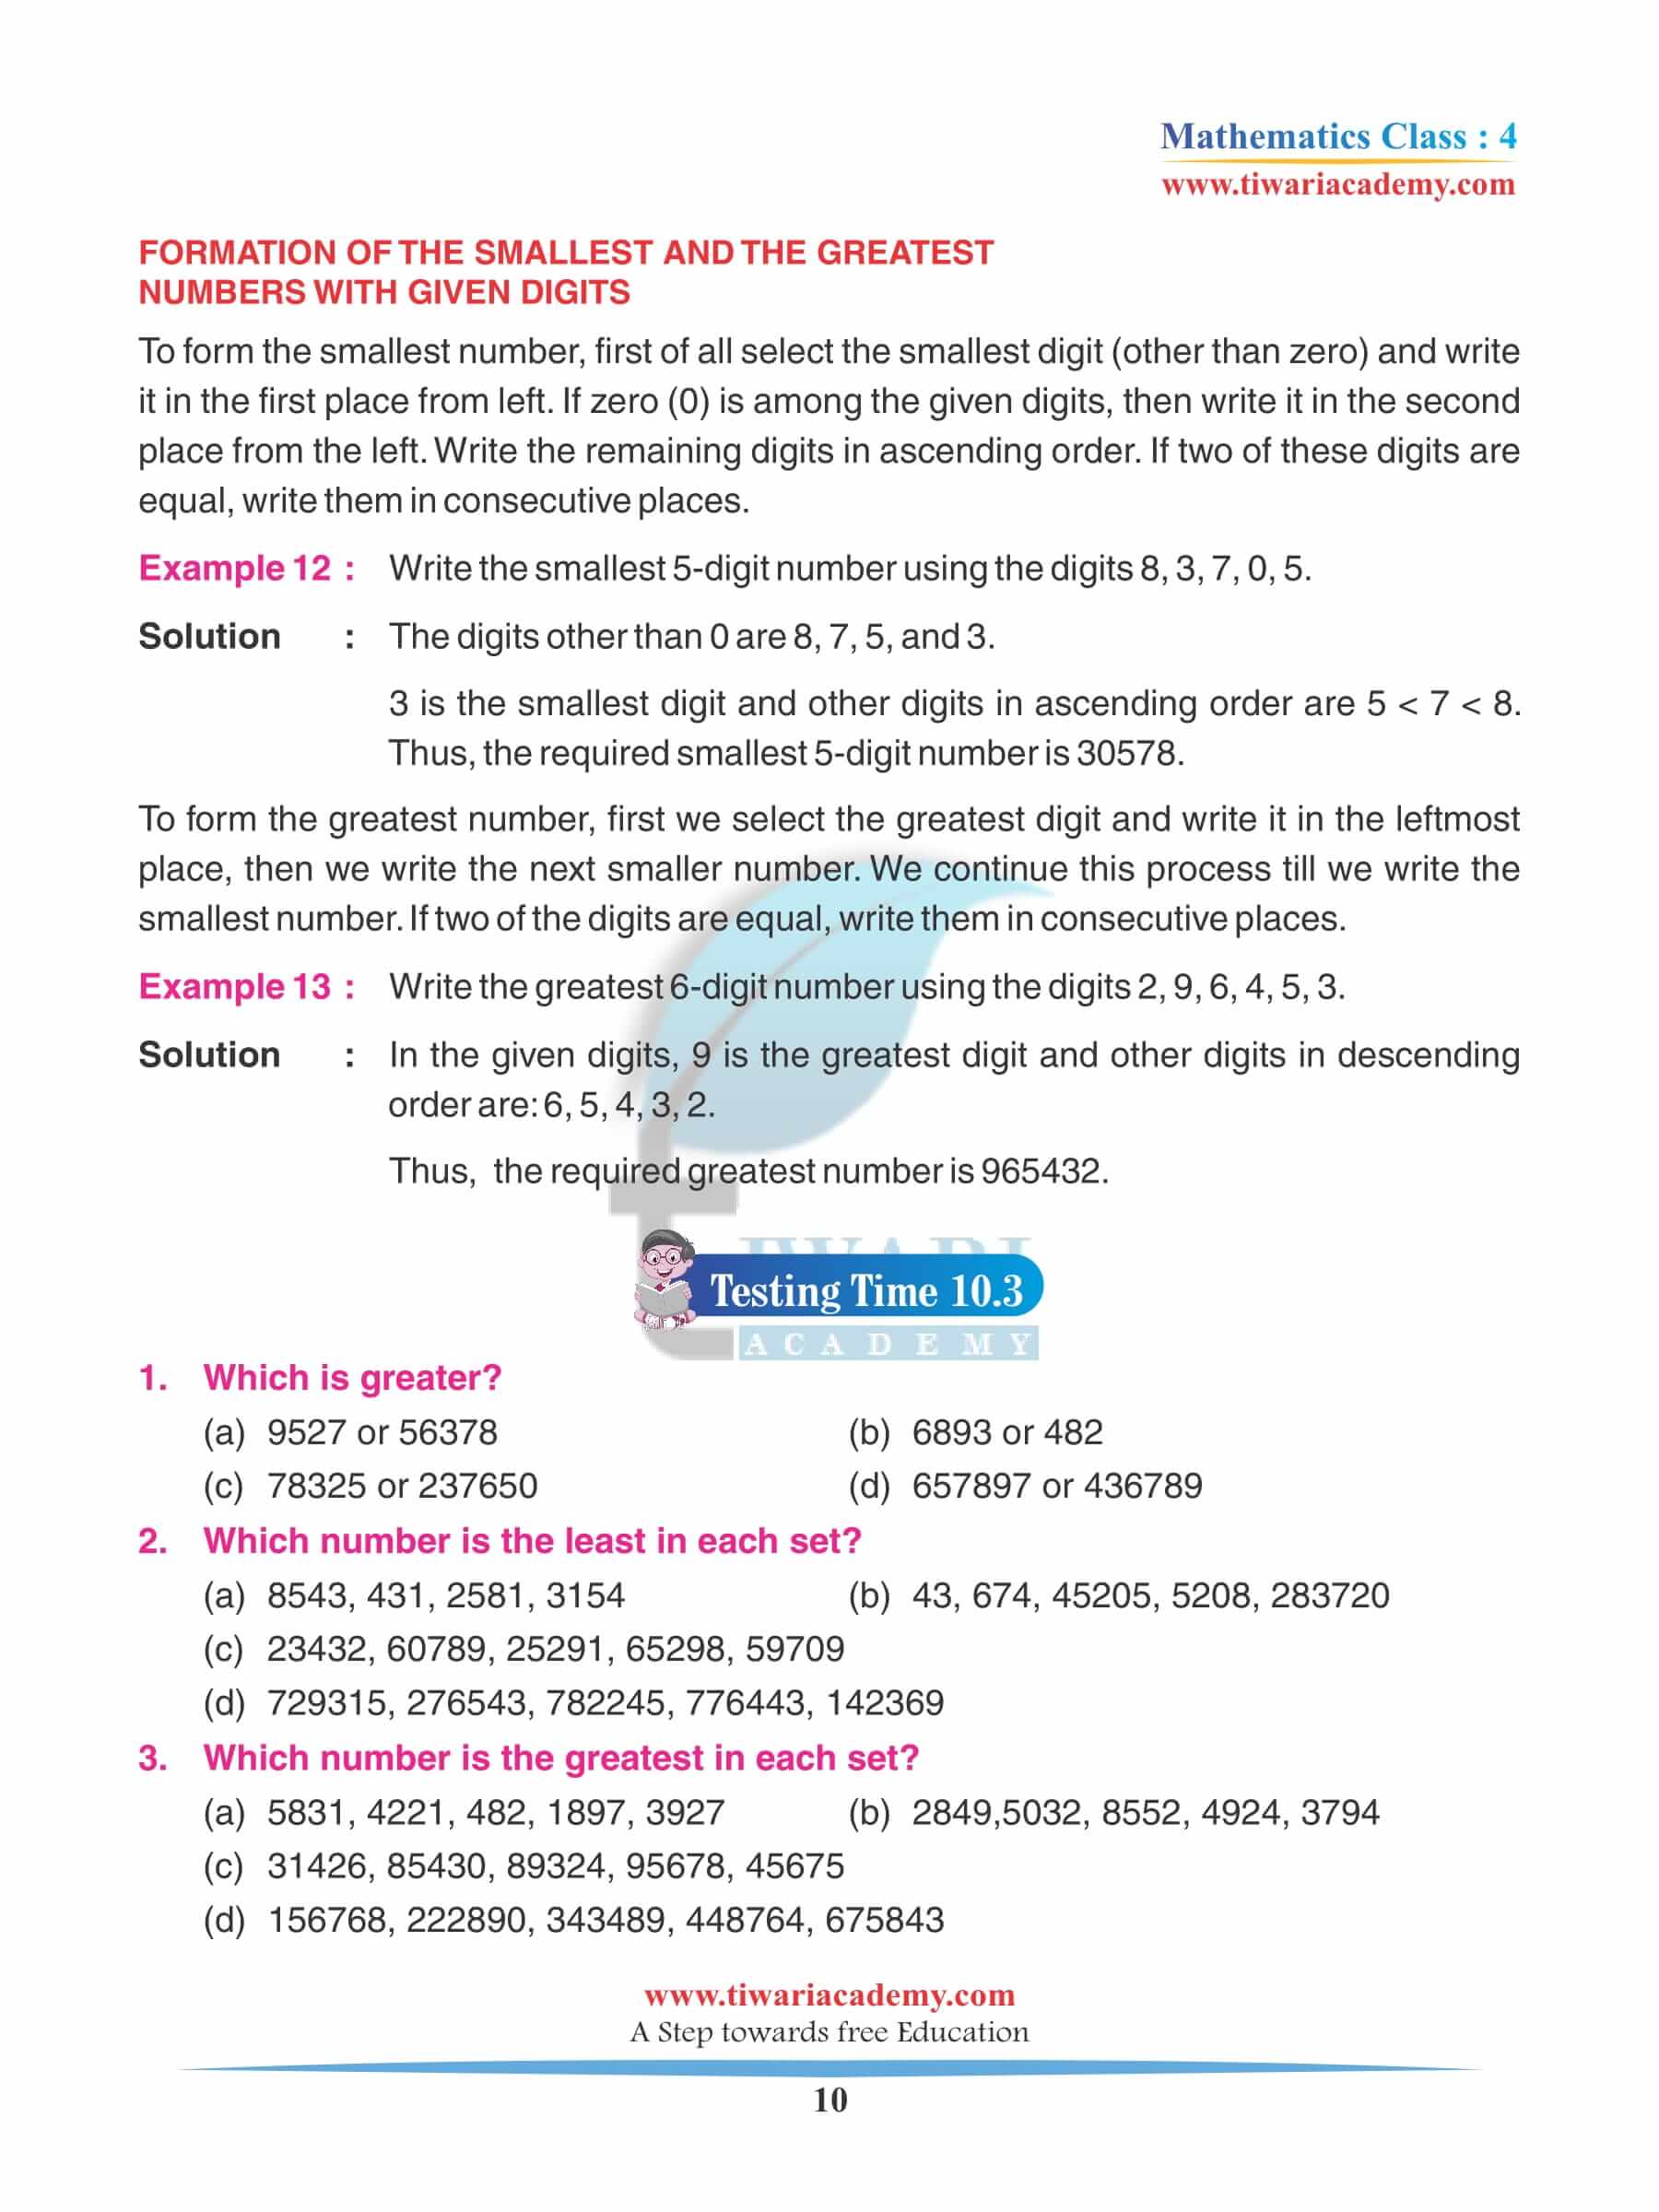 Class 4 Maths Chapter 10 Practice Exercises